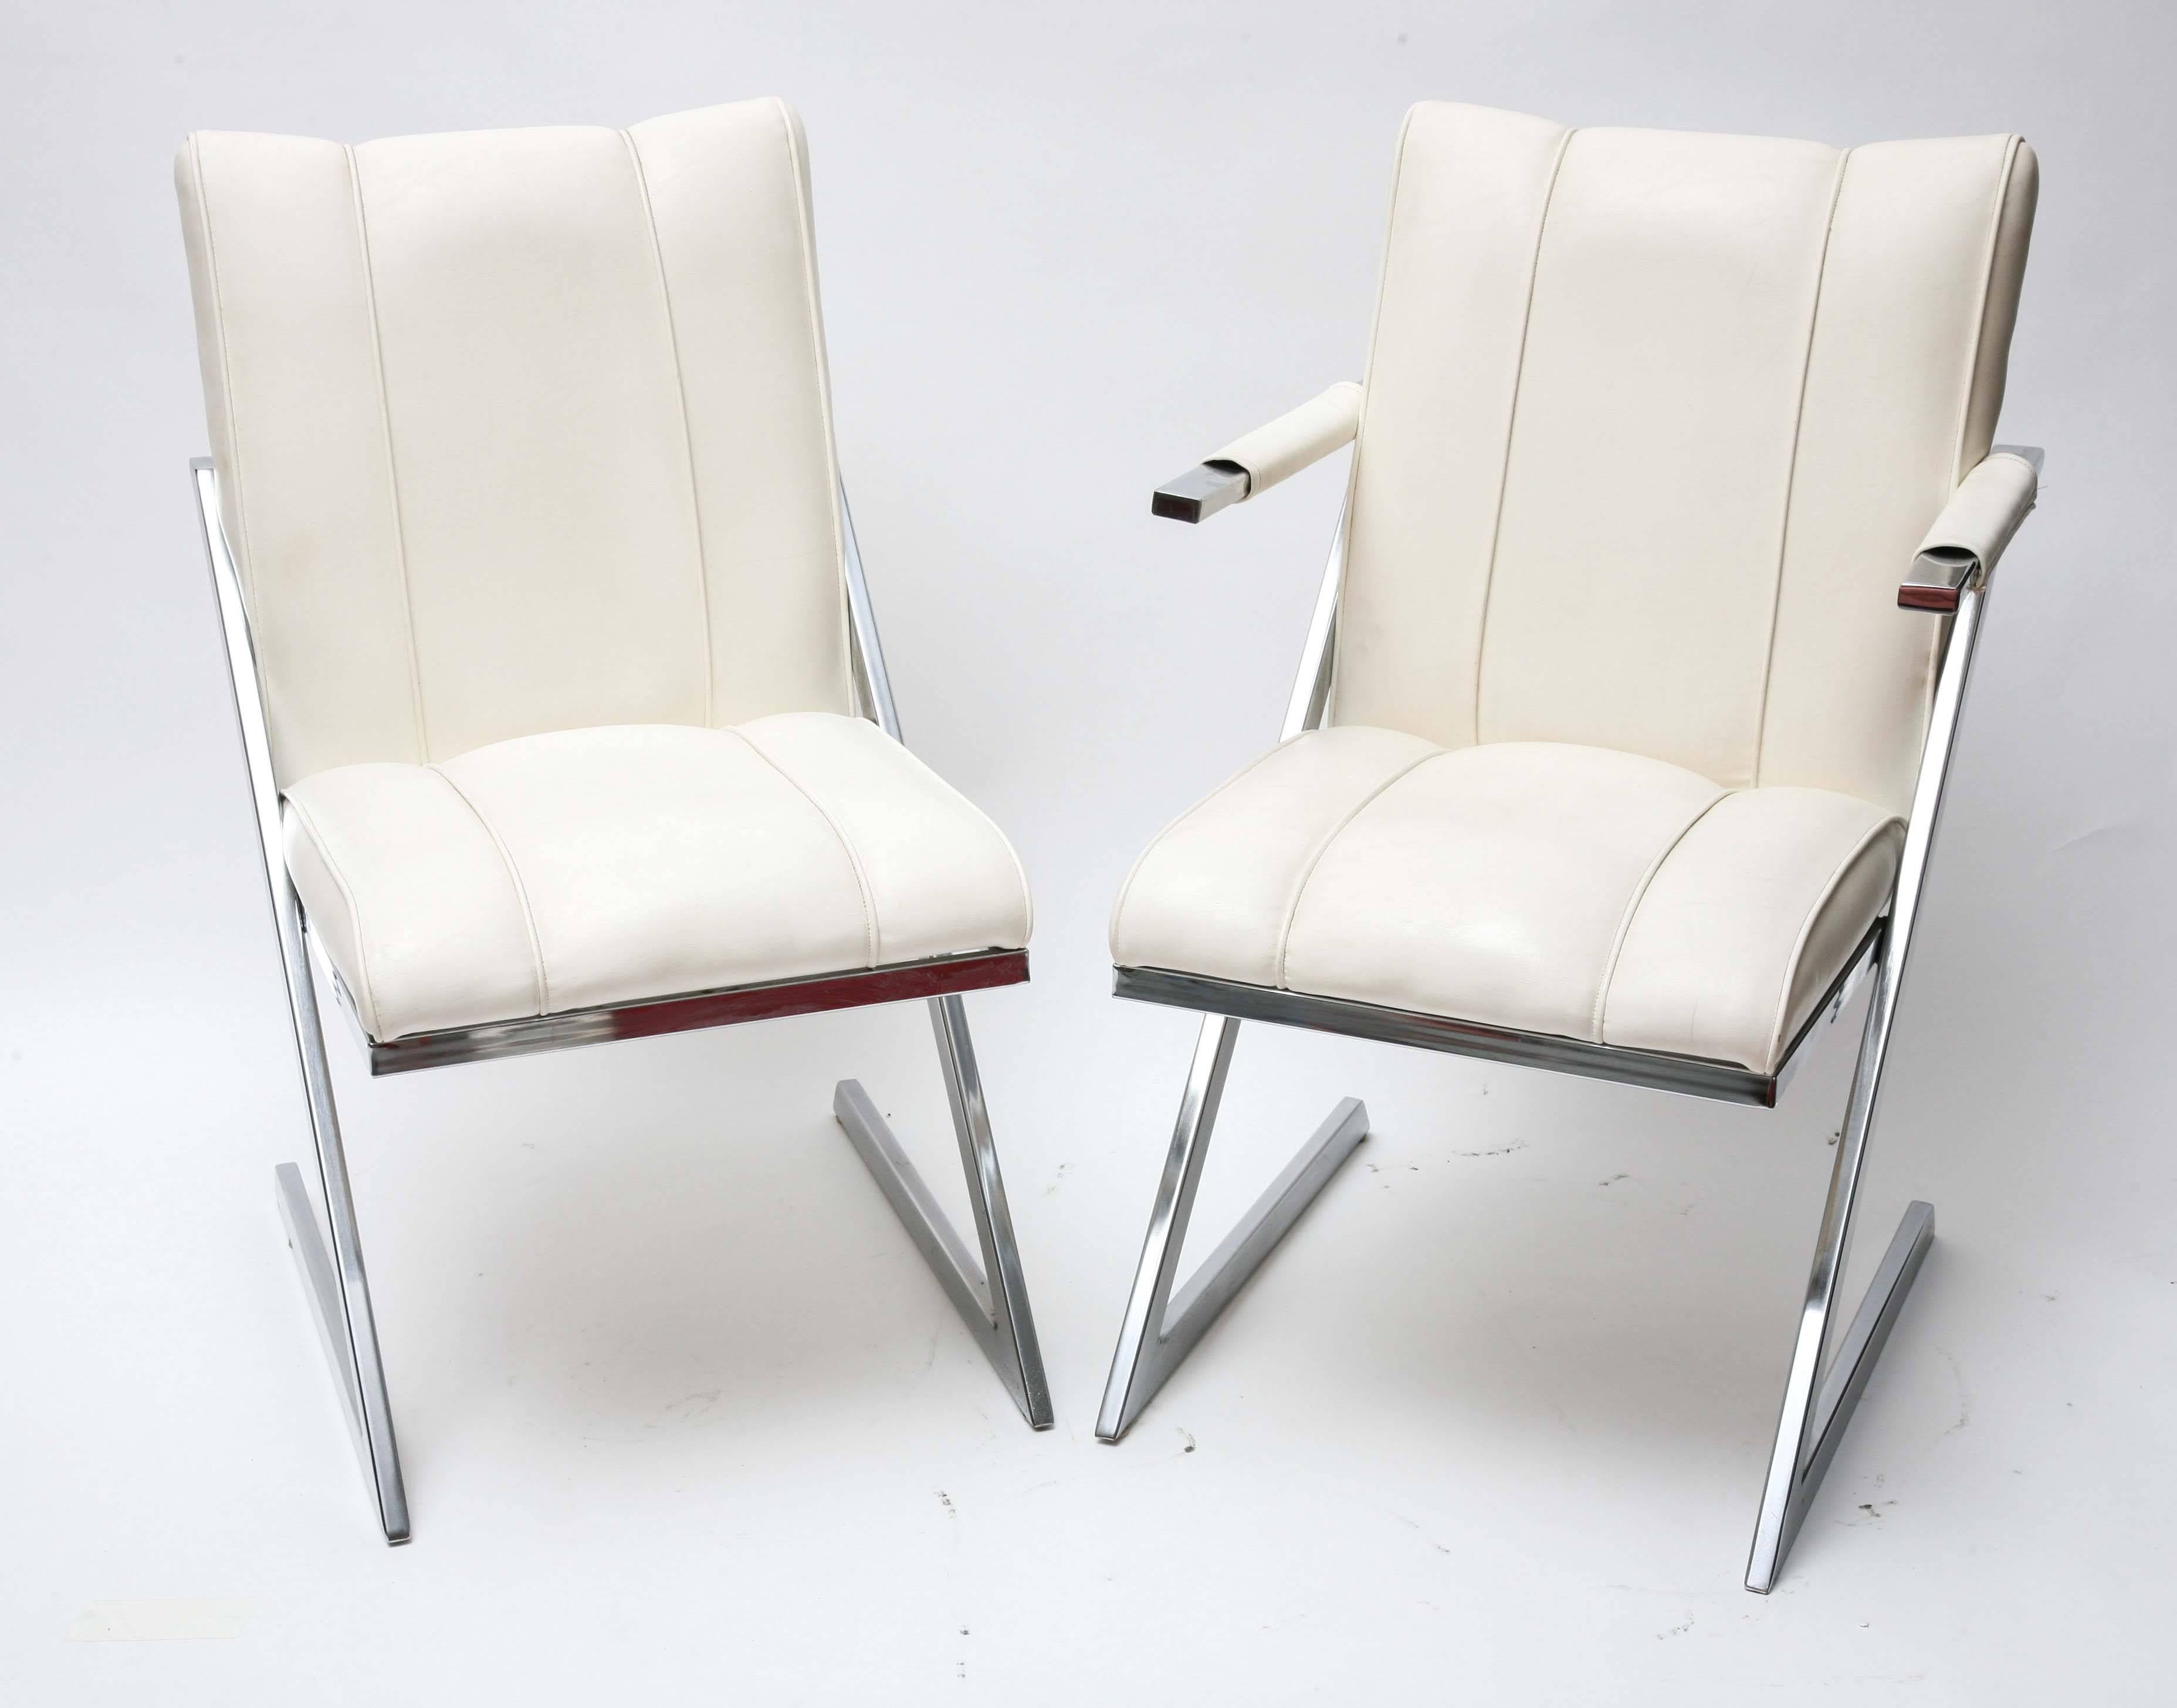 Wonderful Z collection by Milo Baughman for DIA in chrome and leatherette.